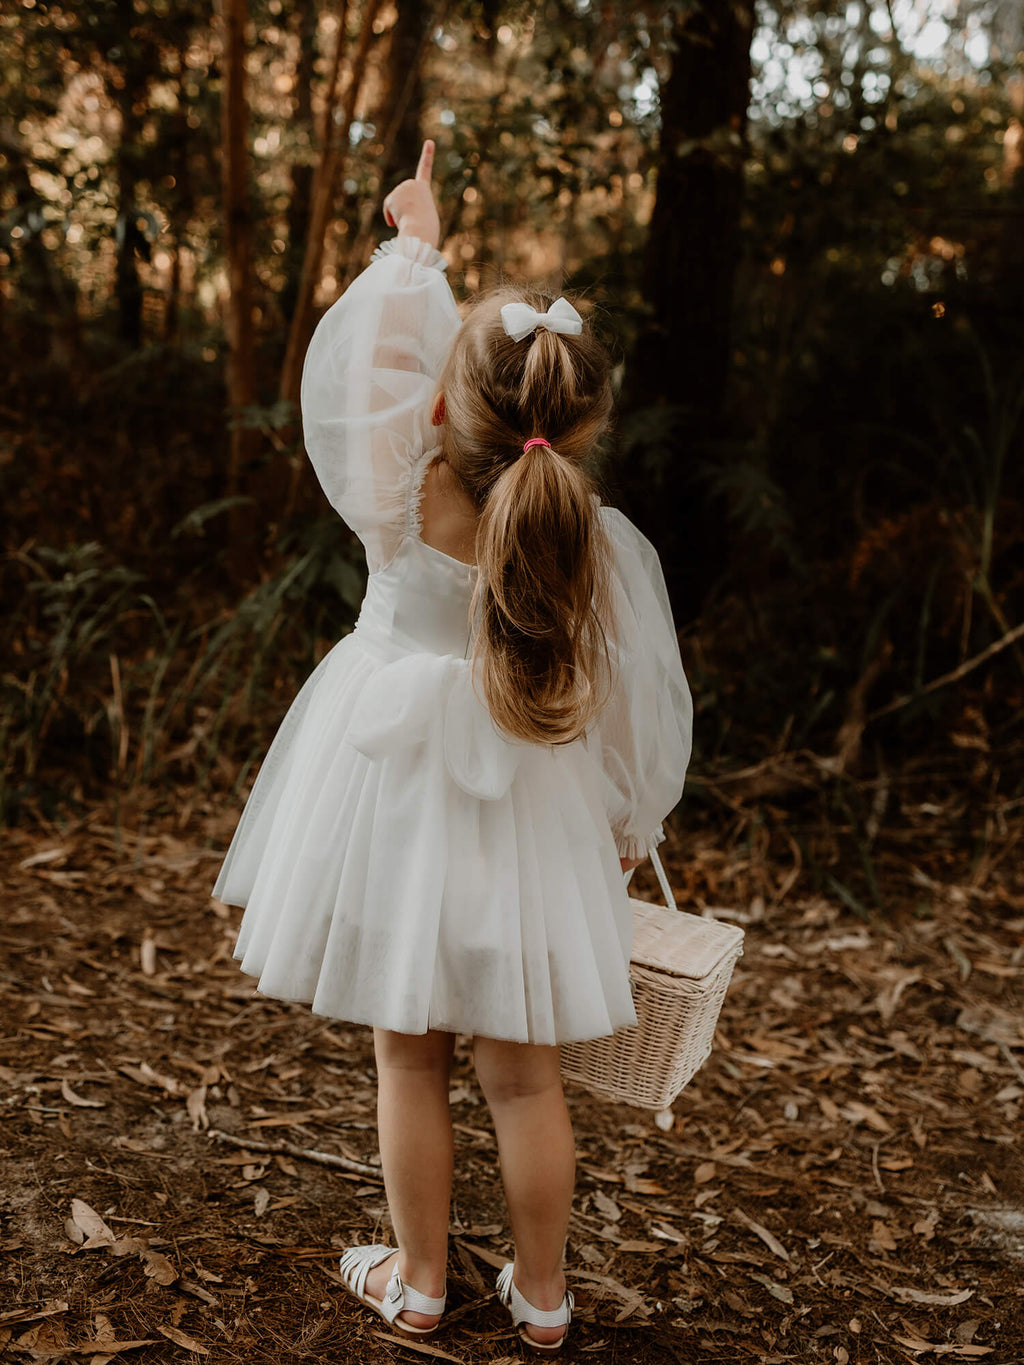 Eva tulle sleeve flower girl dress in ivory is worn by a young girl standing on a bridge. She wears a small ivory tulle bow in her hair, and stands with a flower girl basket at her feet.